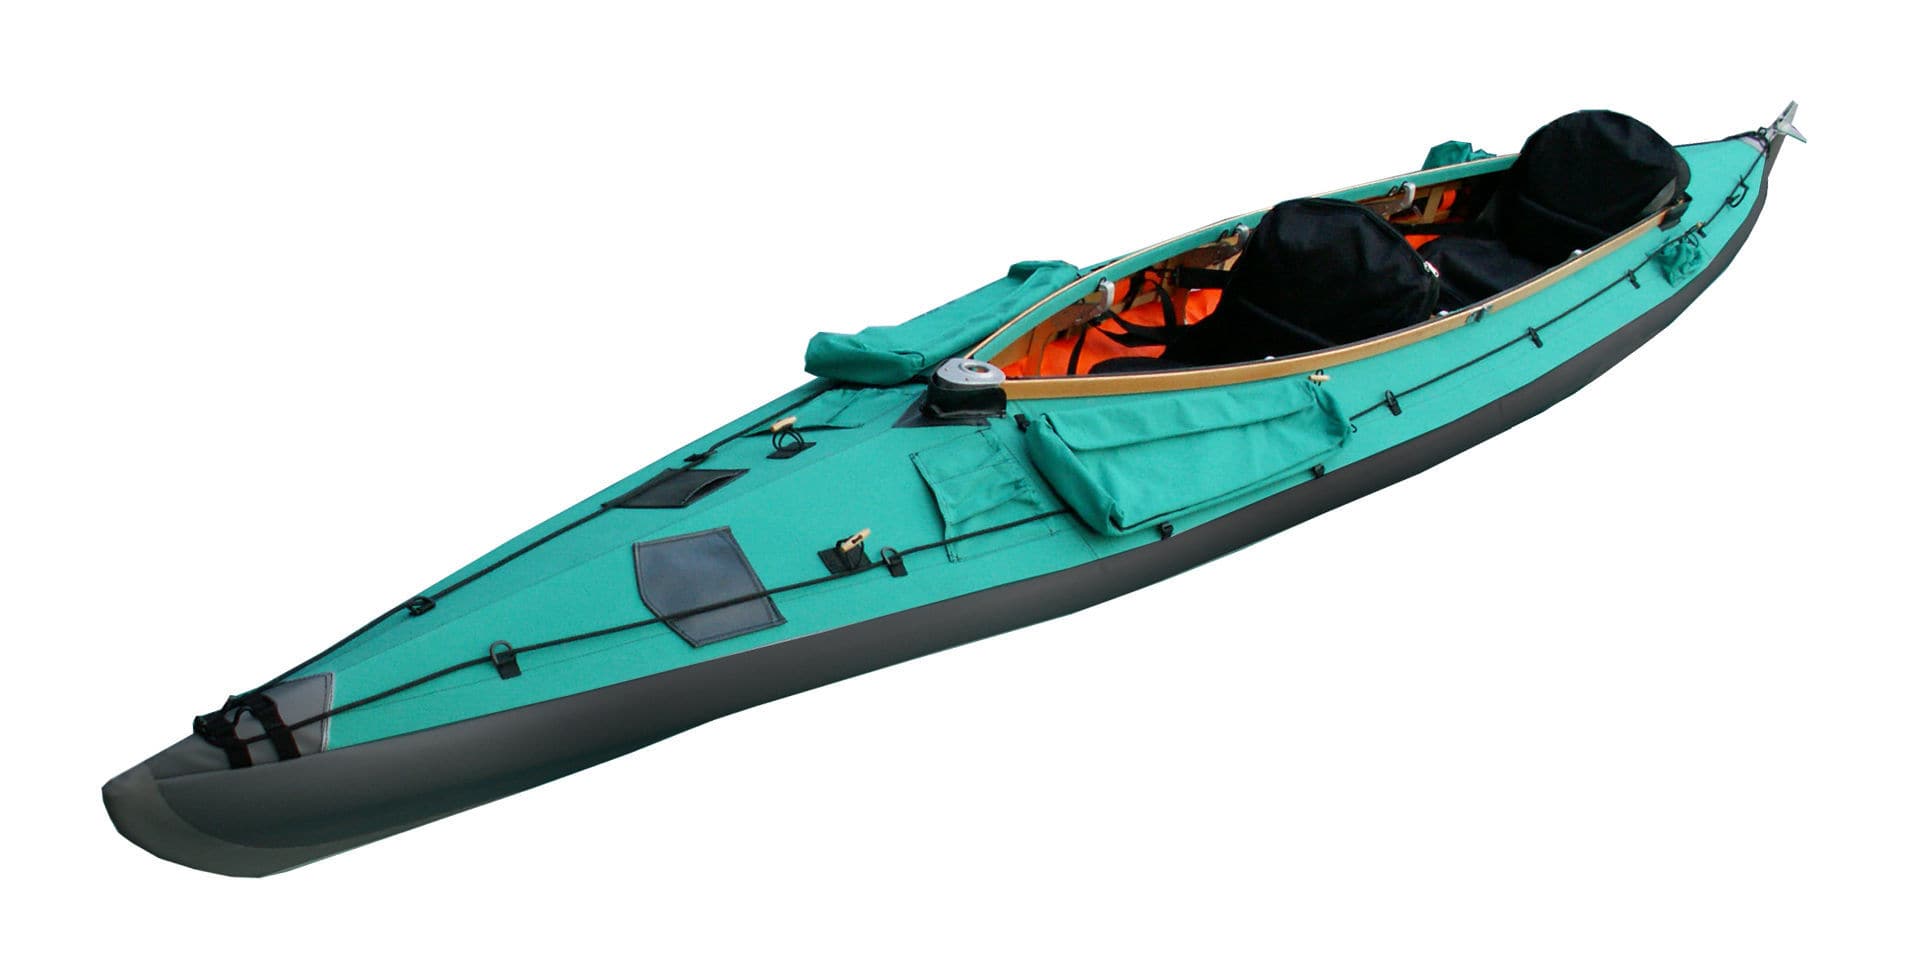 Foldable Kayaks: Set up and Assembly Considerations